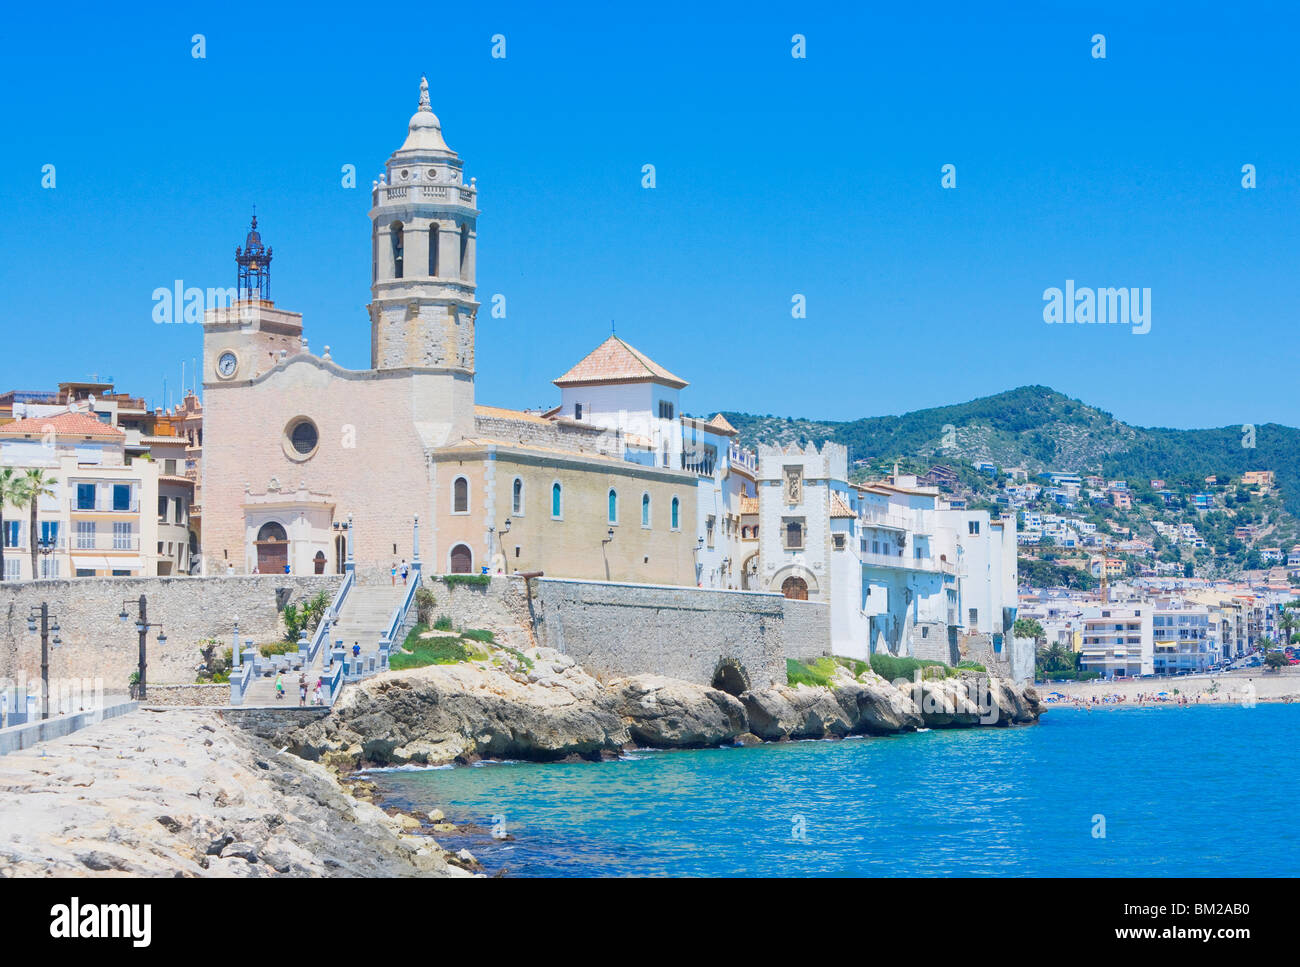 Sitges old centre and seaside, Sitges, Costa Dorada, Catalonia, Spain Stock Photo